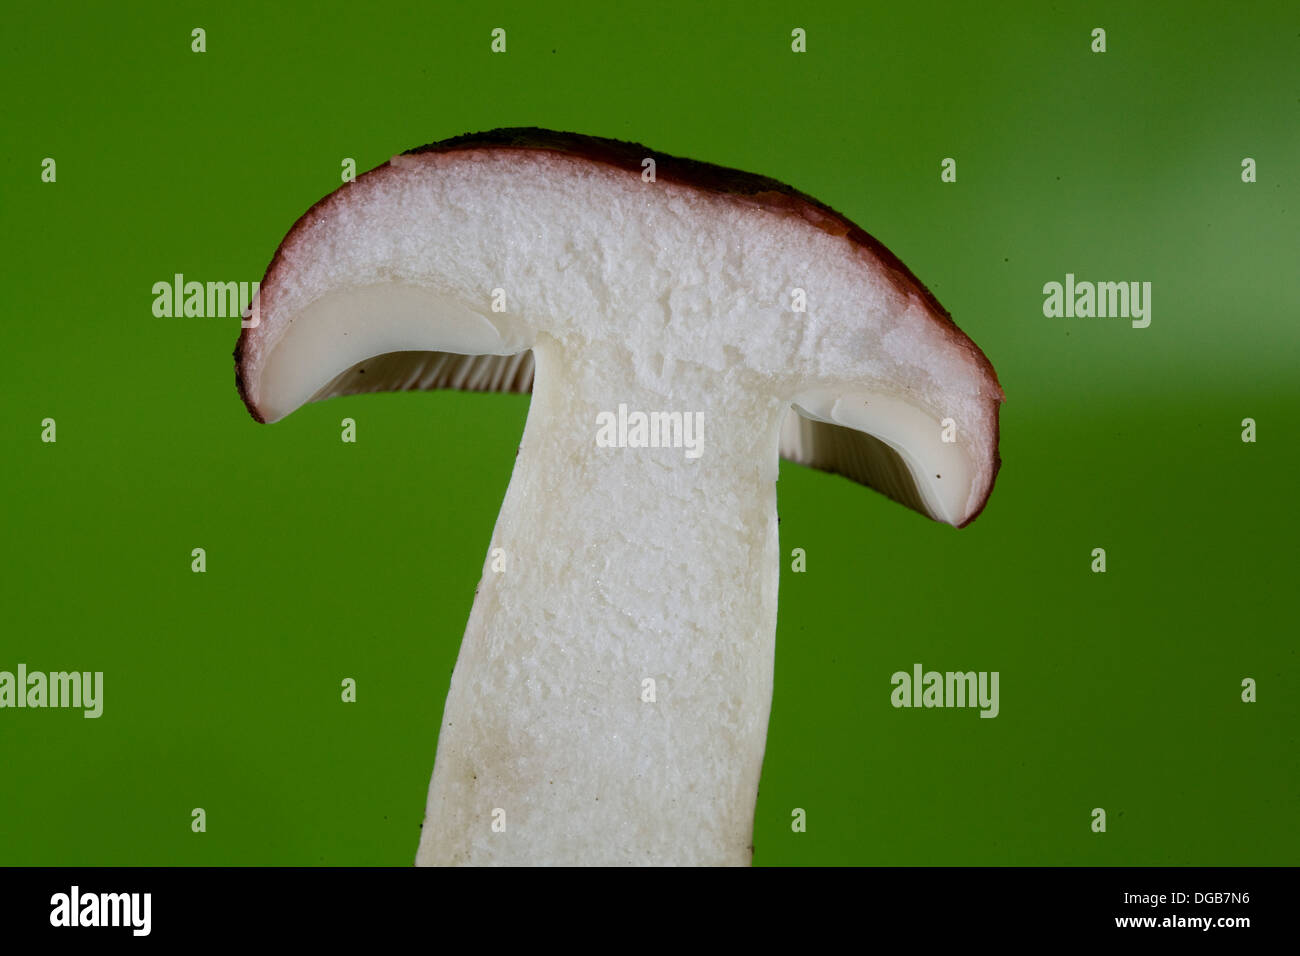 A wild mushroom with adnexed or lightly attached gills Stock Photo